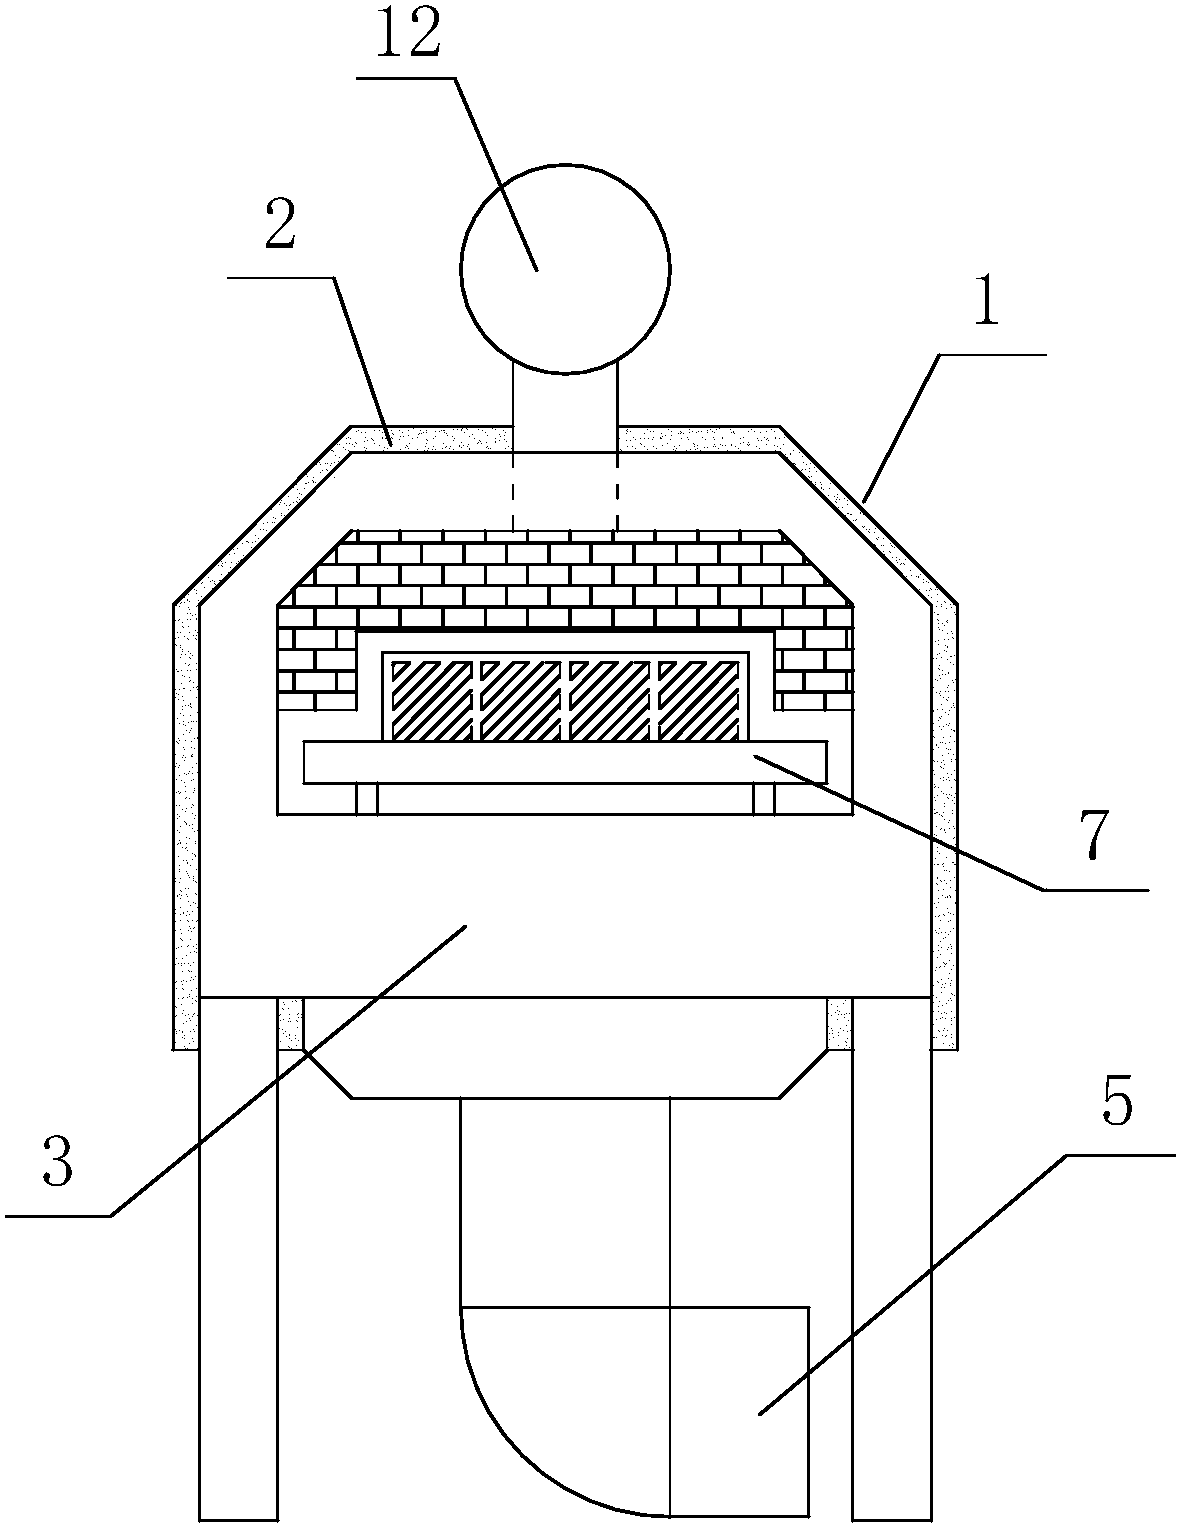 Setting device and method for drying honeycombed ceramic by waste heat air